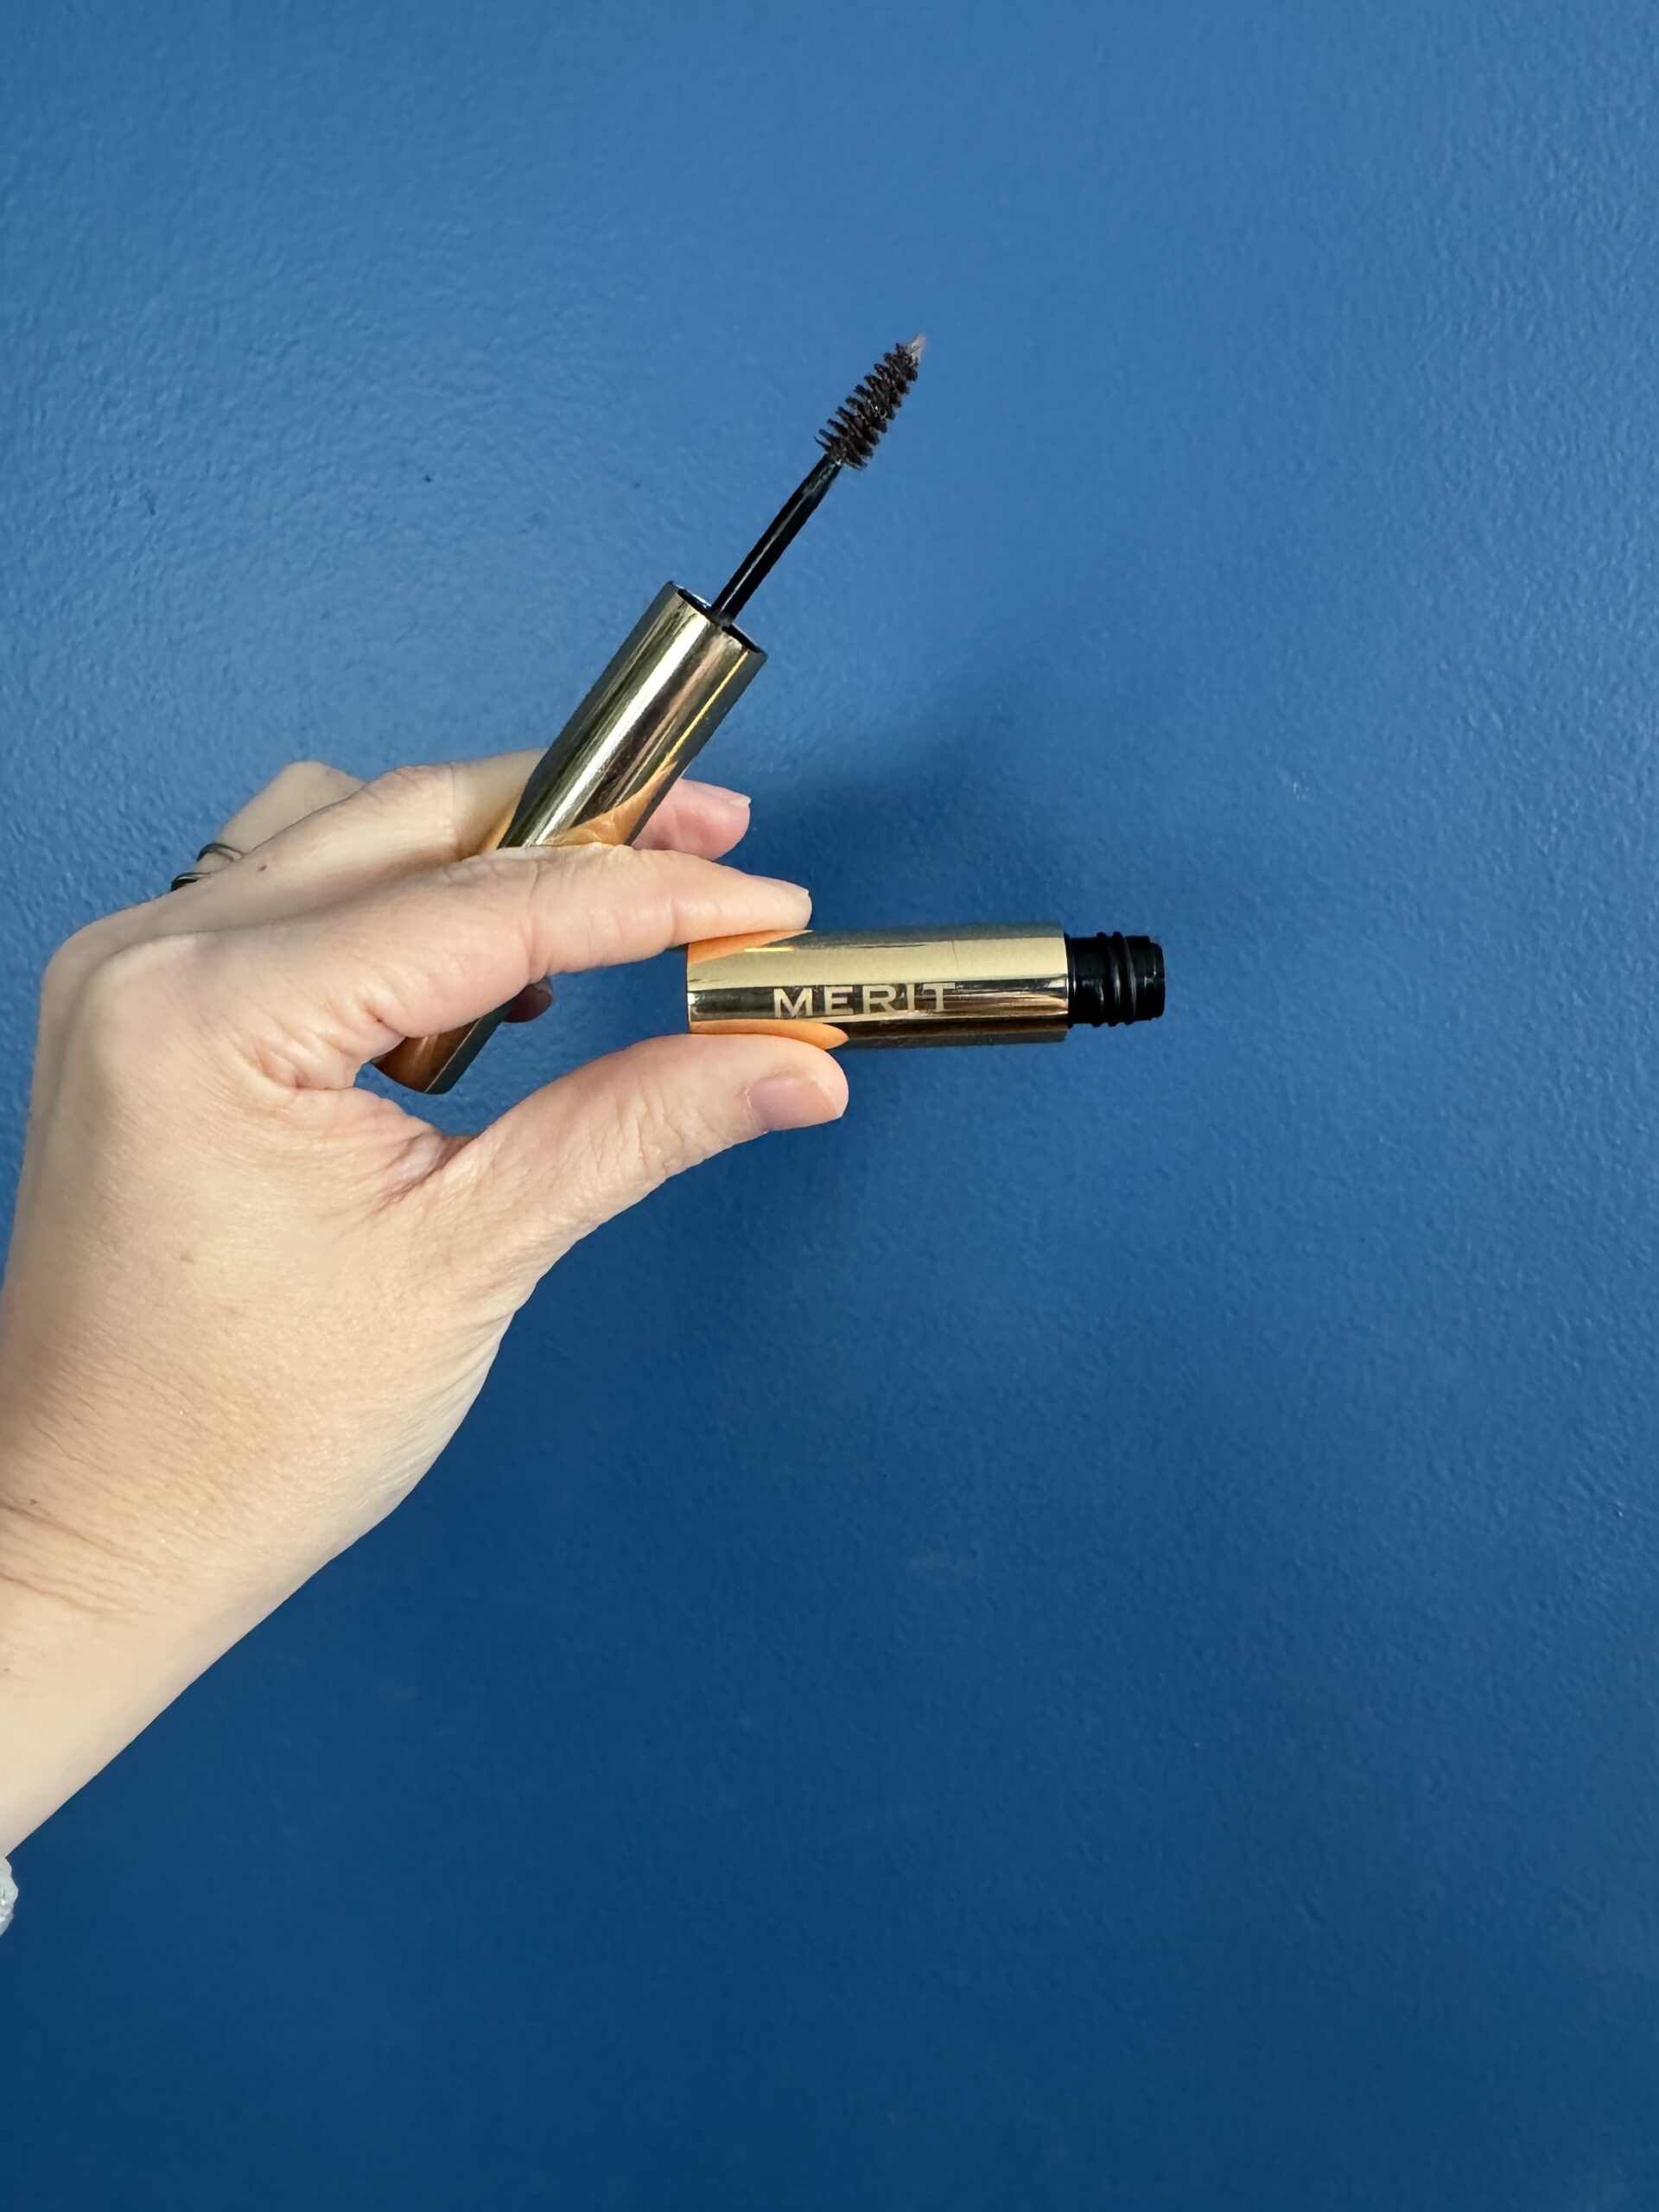 A hand holding an open mascara tube against a blue background.